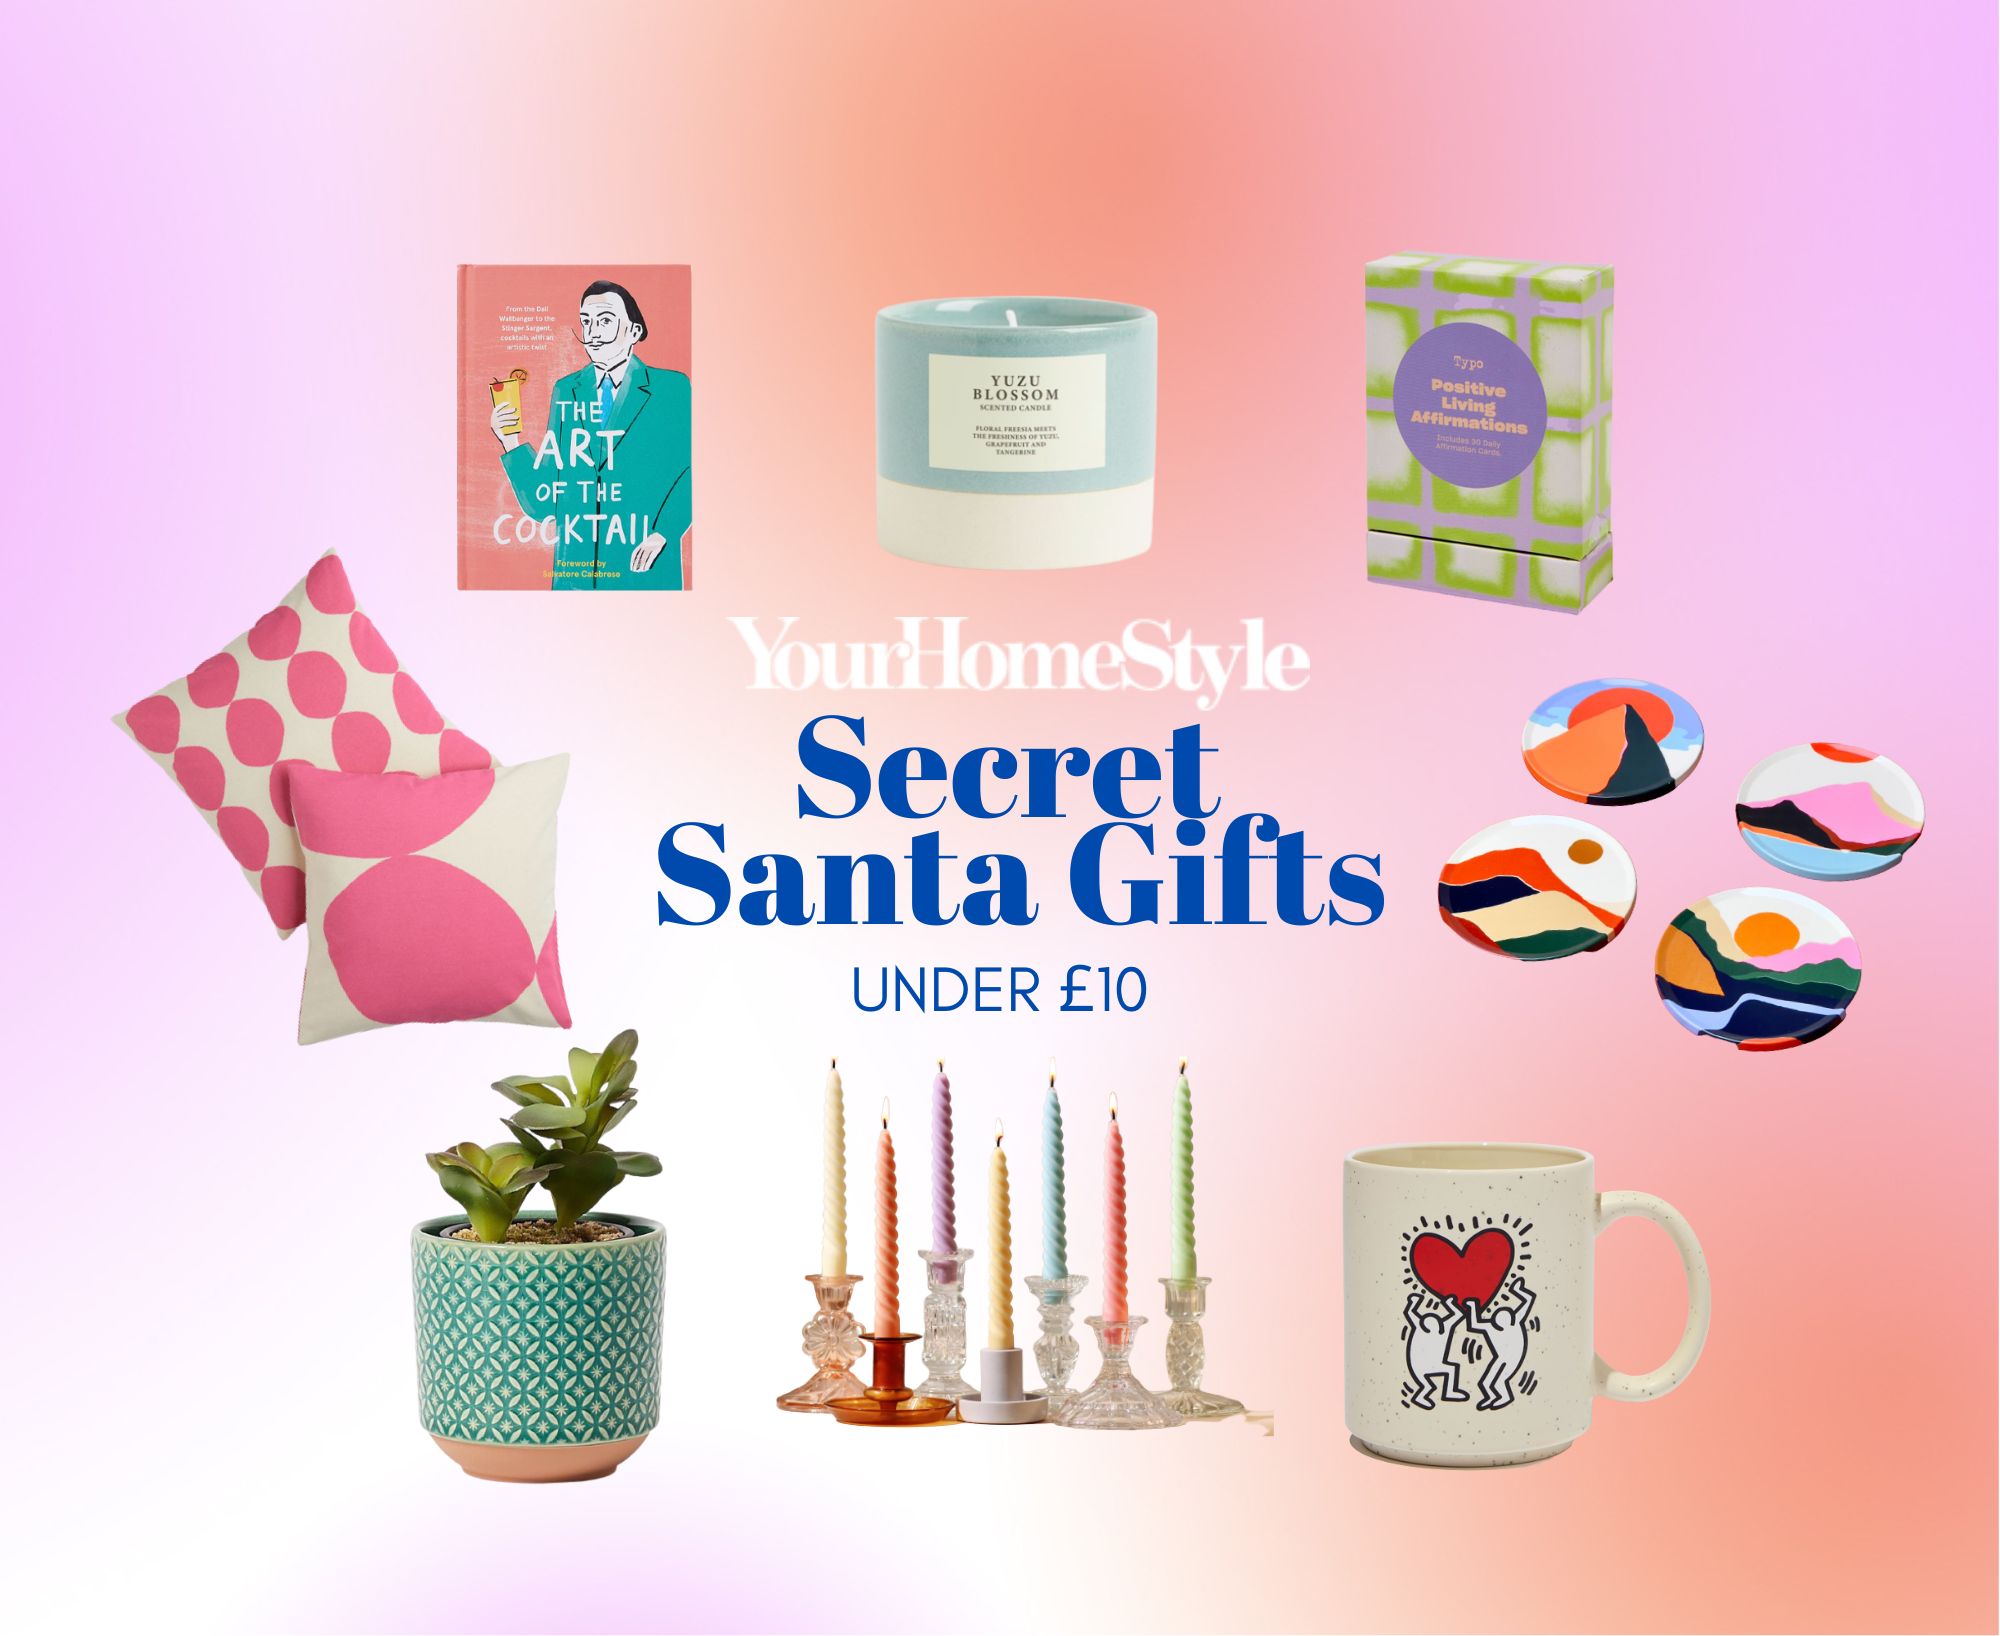 Secret Santa gifts under £10 you'll actually want to buy, as chosen by  YourHomeStyle experts - Your Home Style